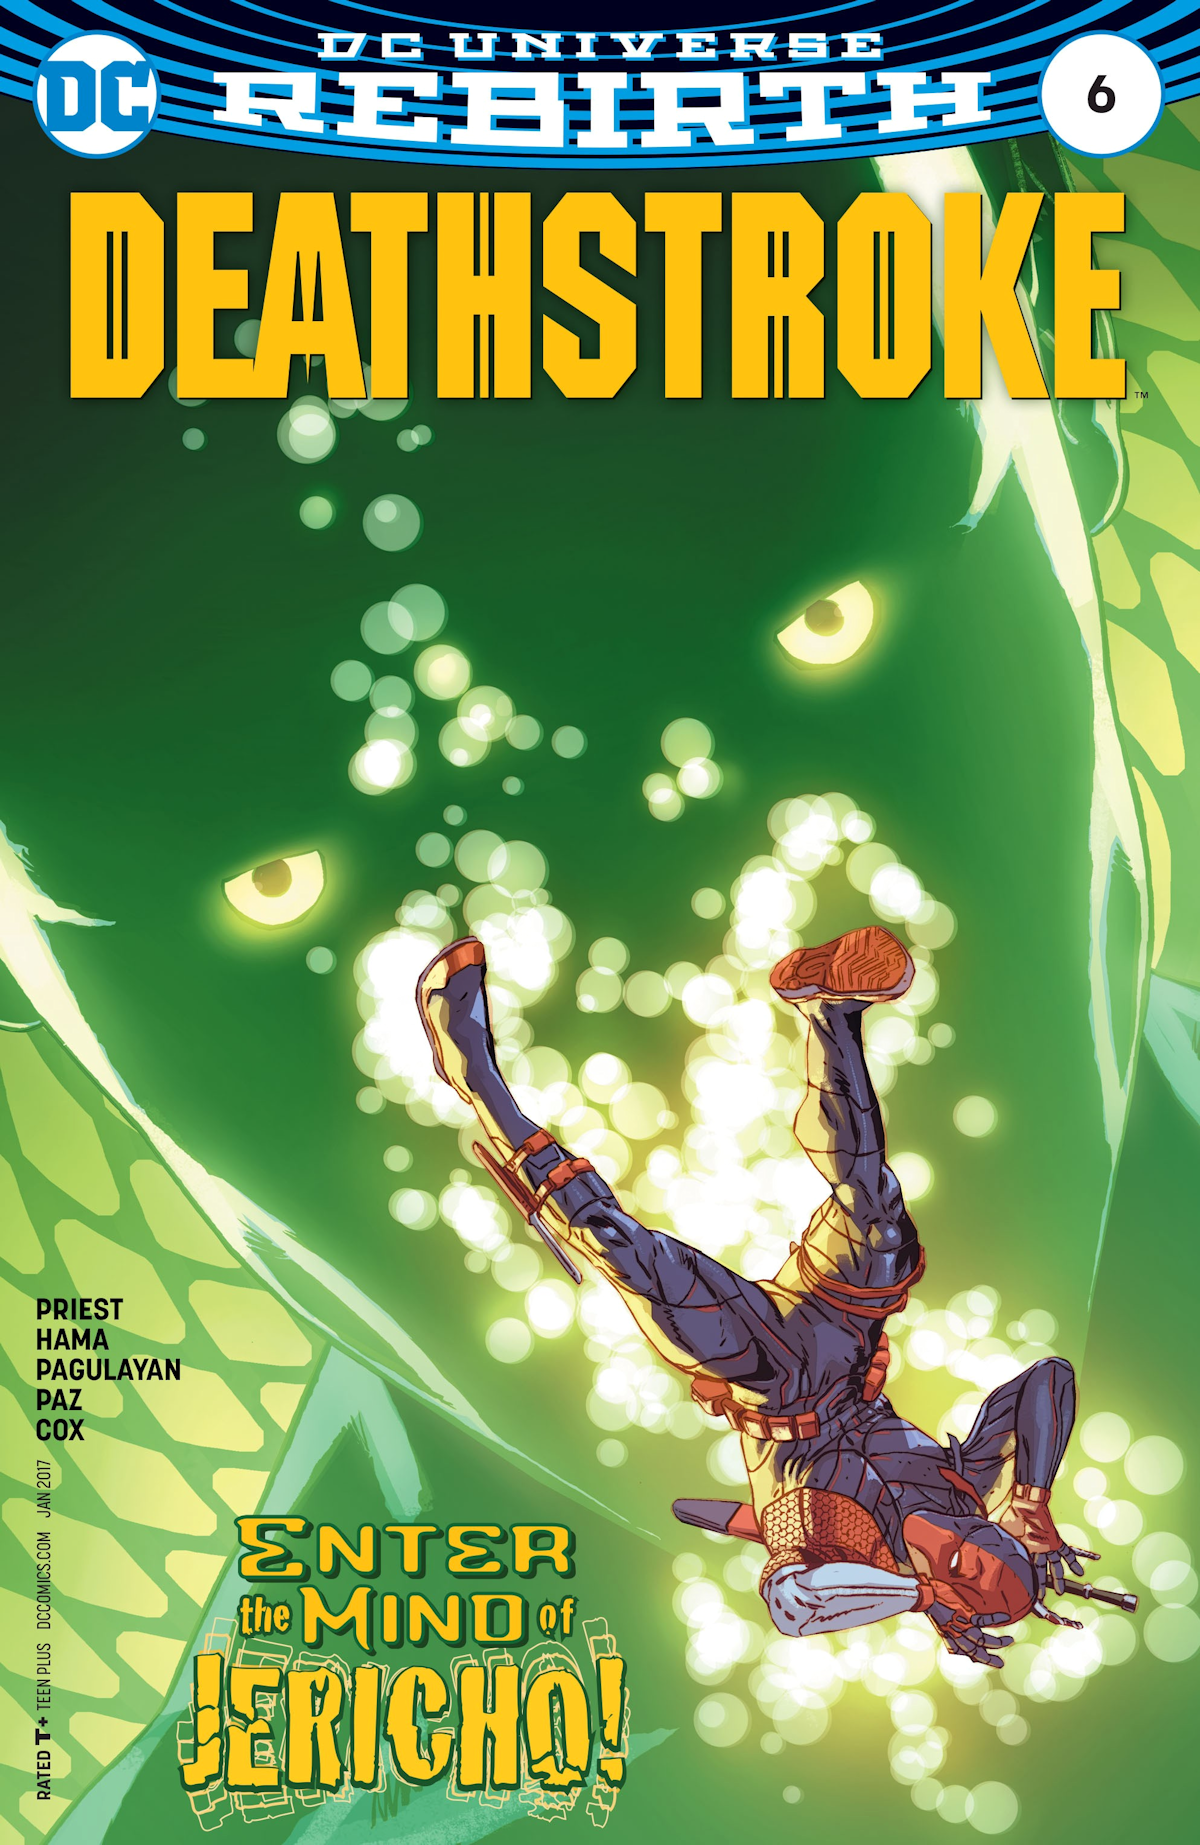 Deathstroke Vol. 4 6 (Cover A)